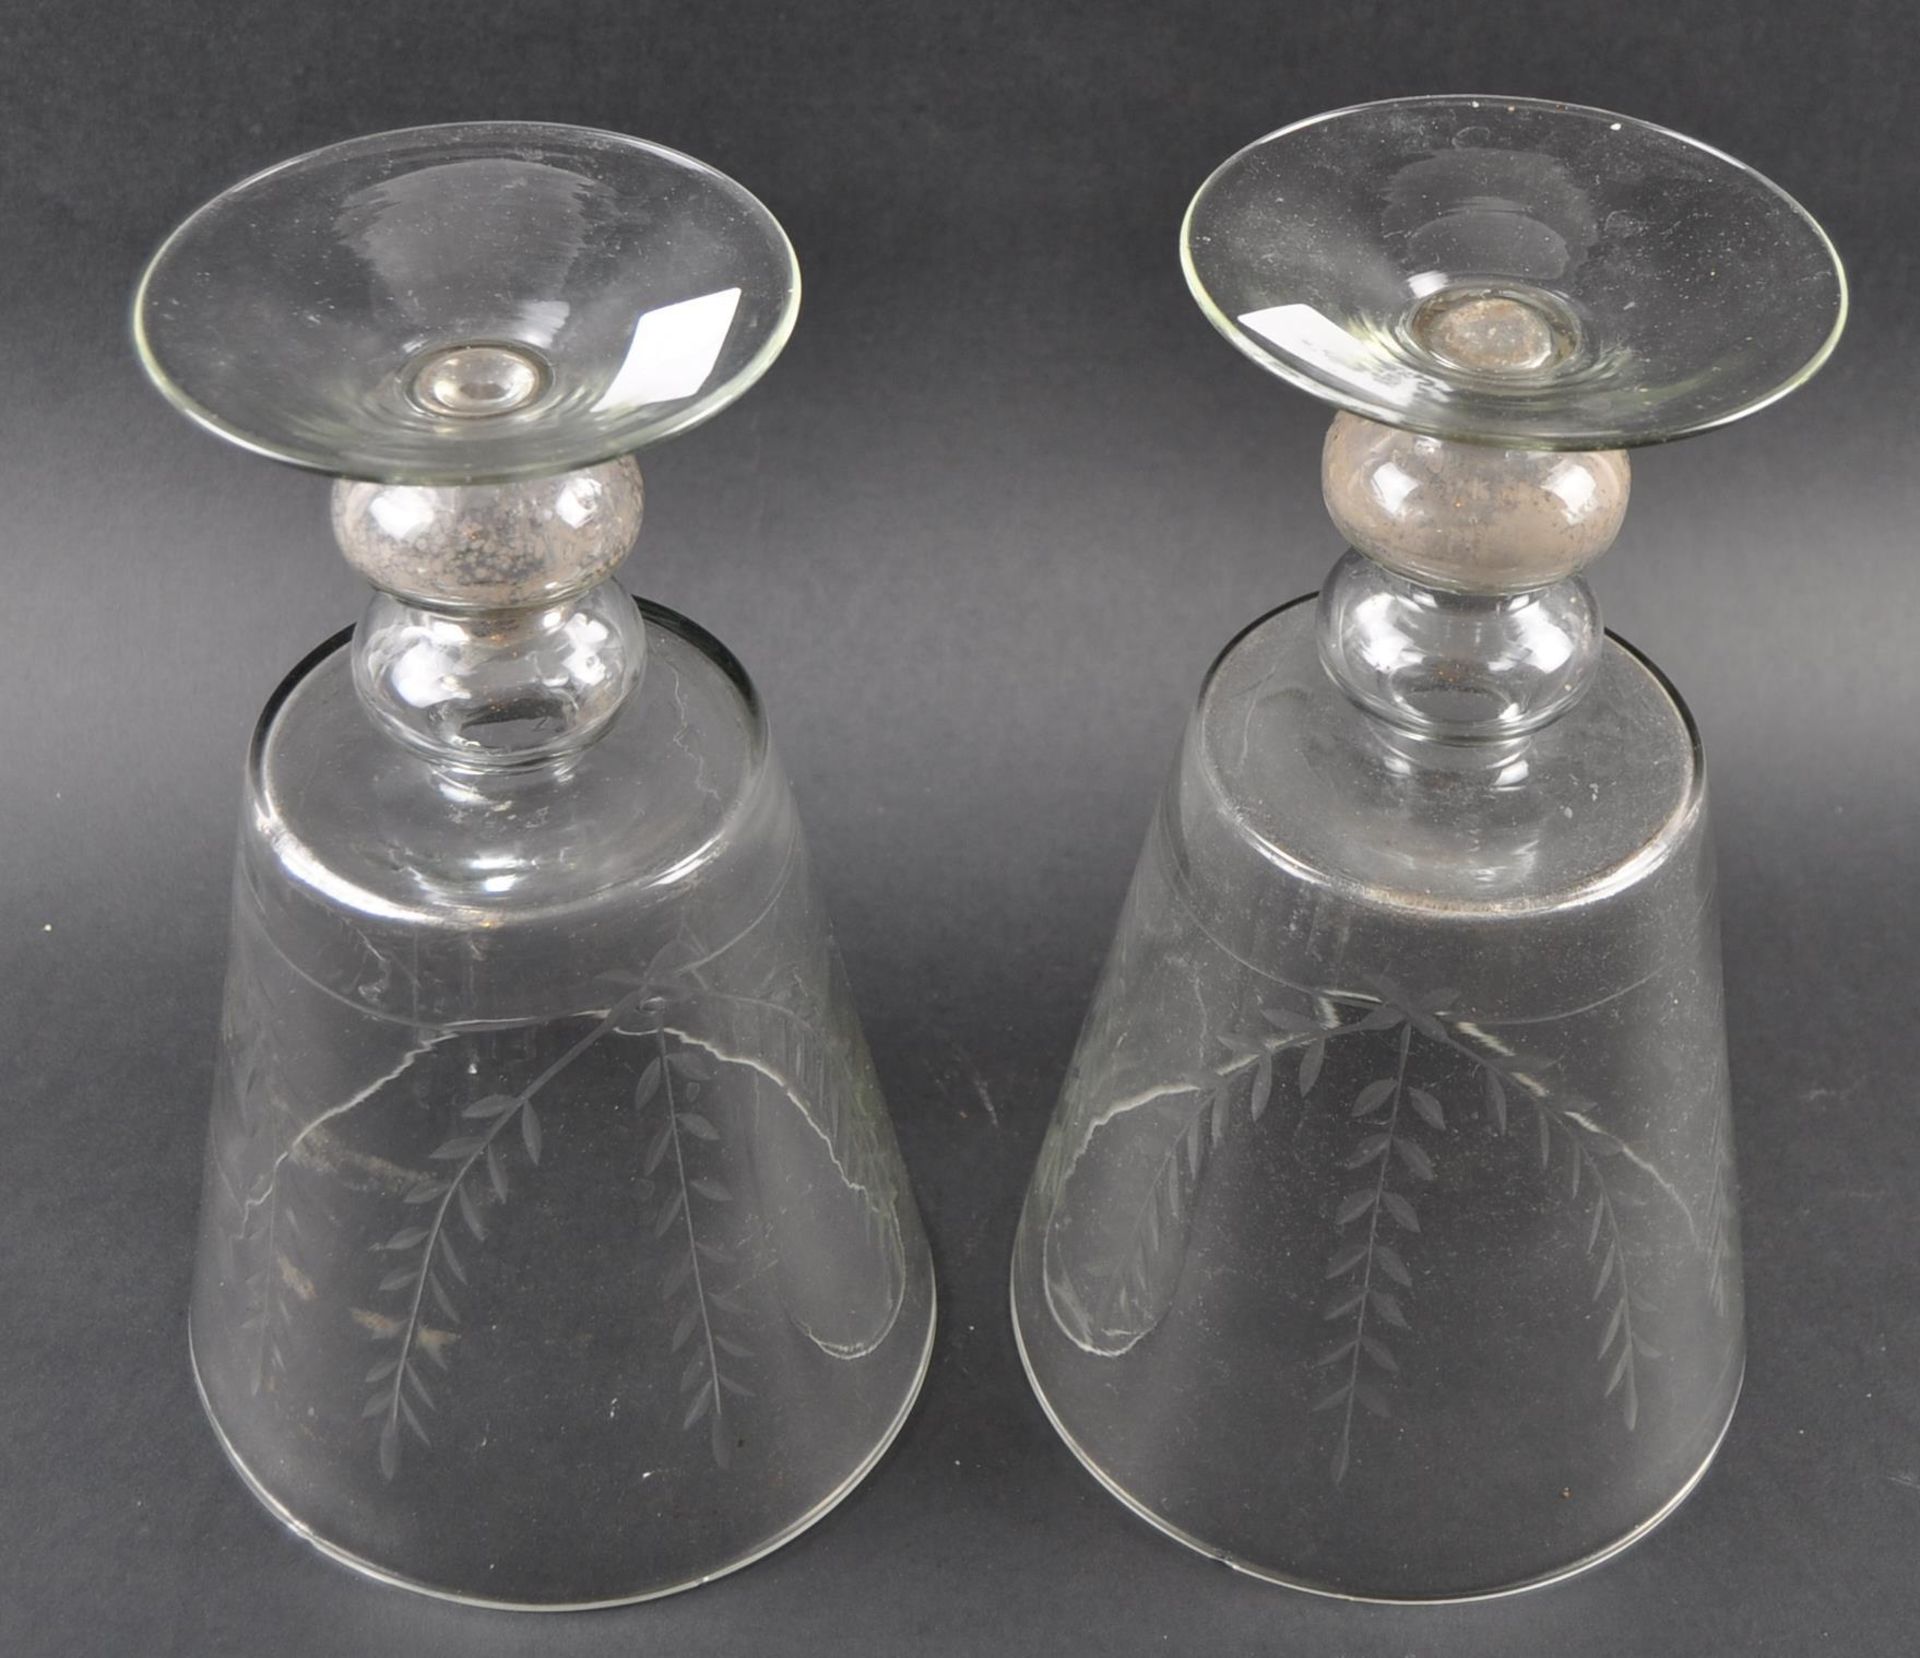 VERY LARGE 19TH CENTURY ETCHED GLASS VASES - Image 4 of 5